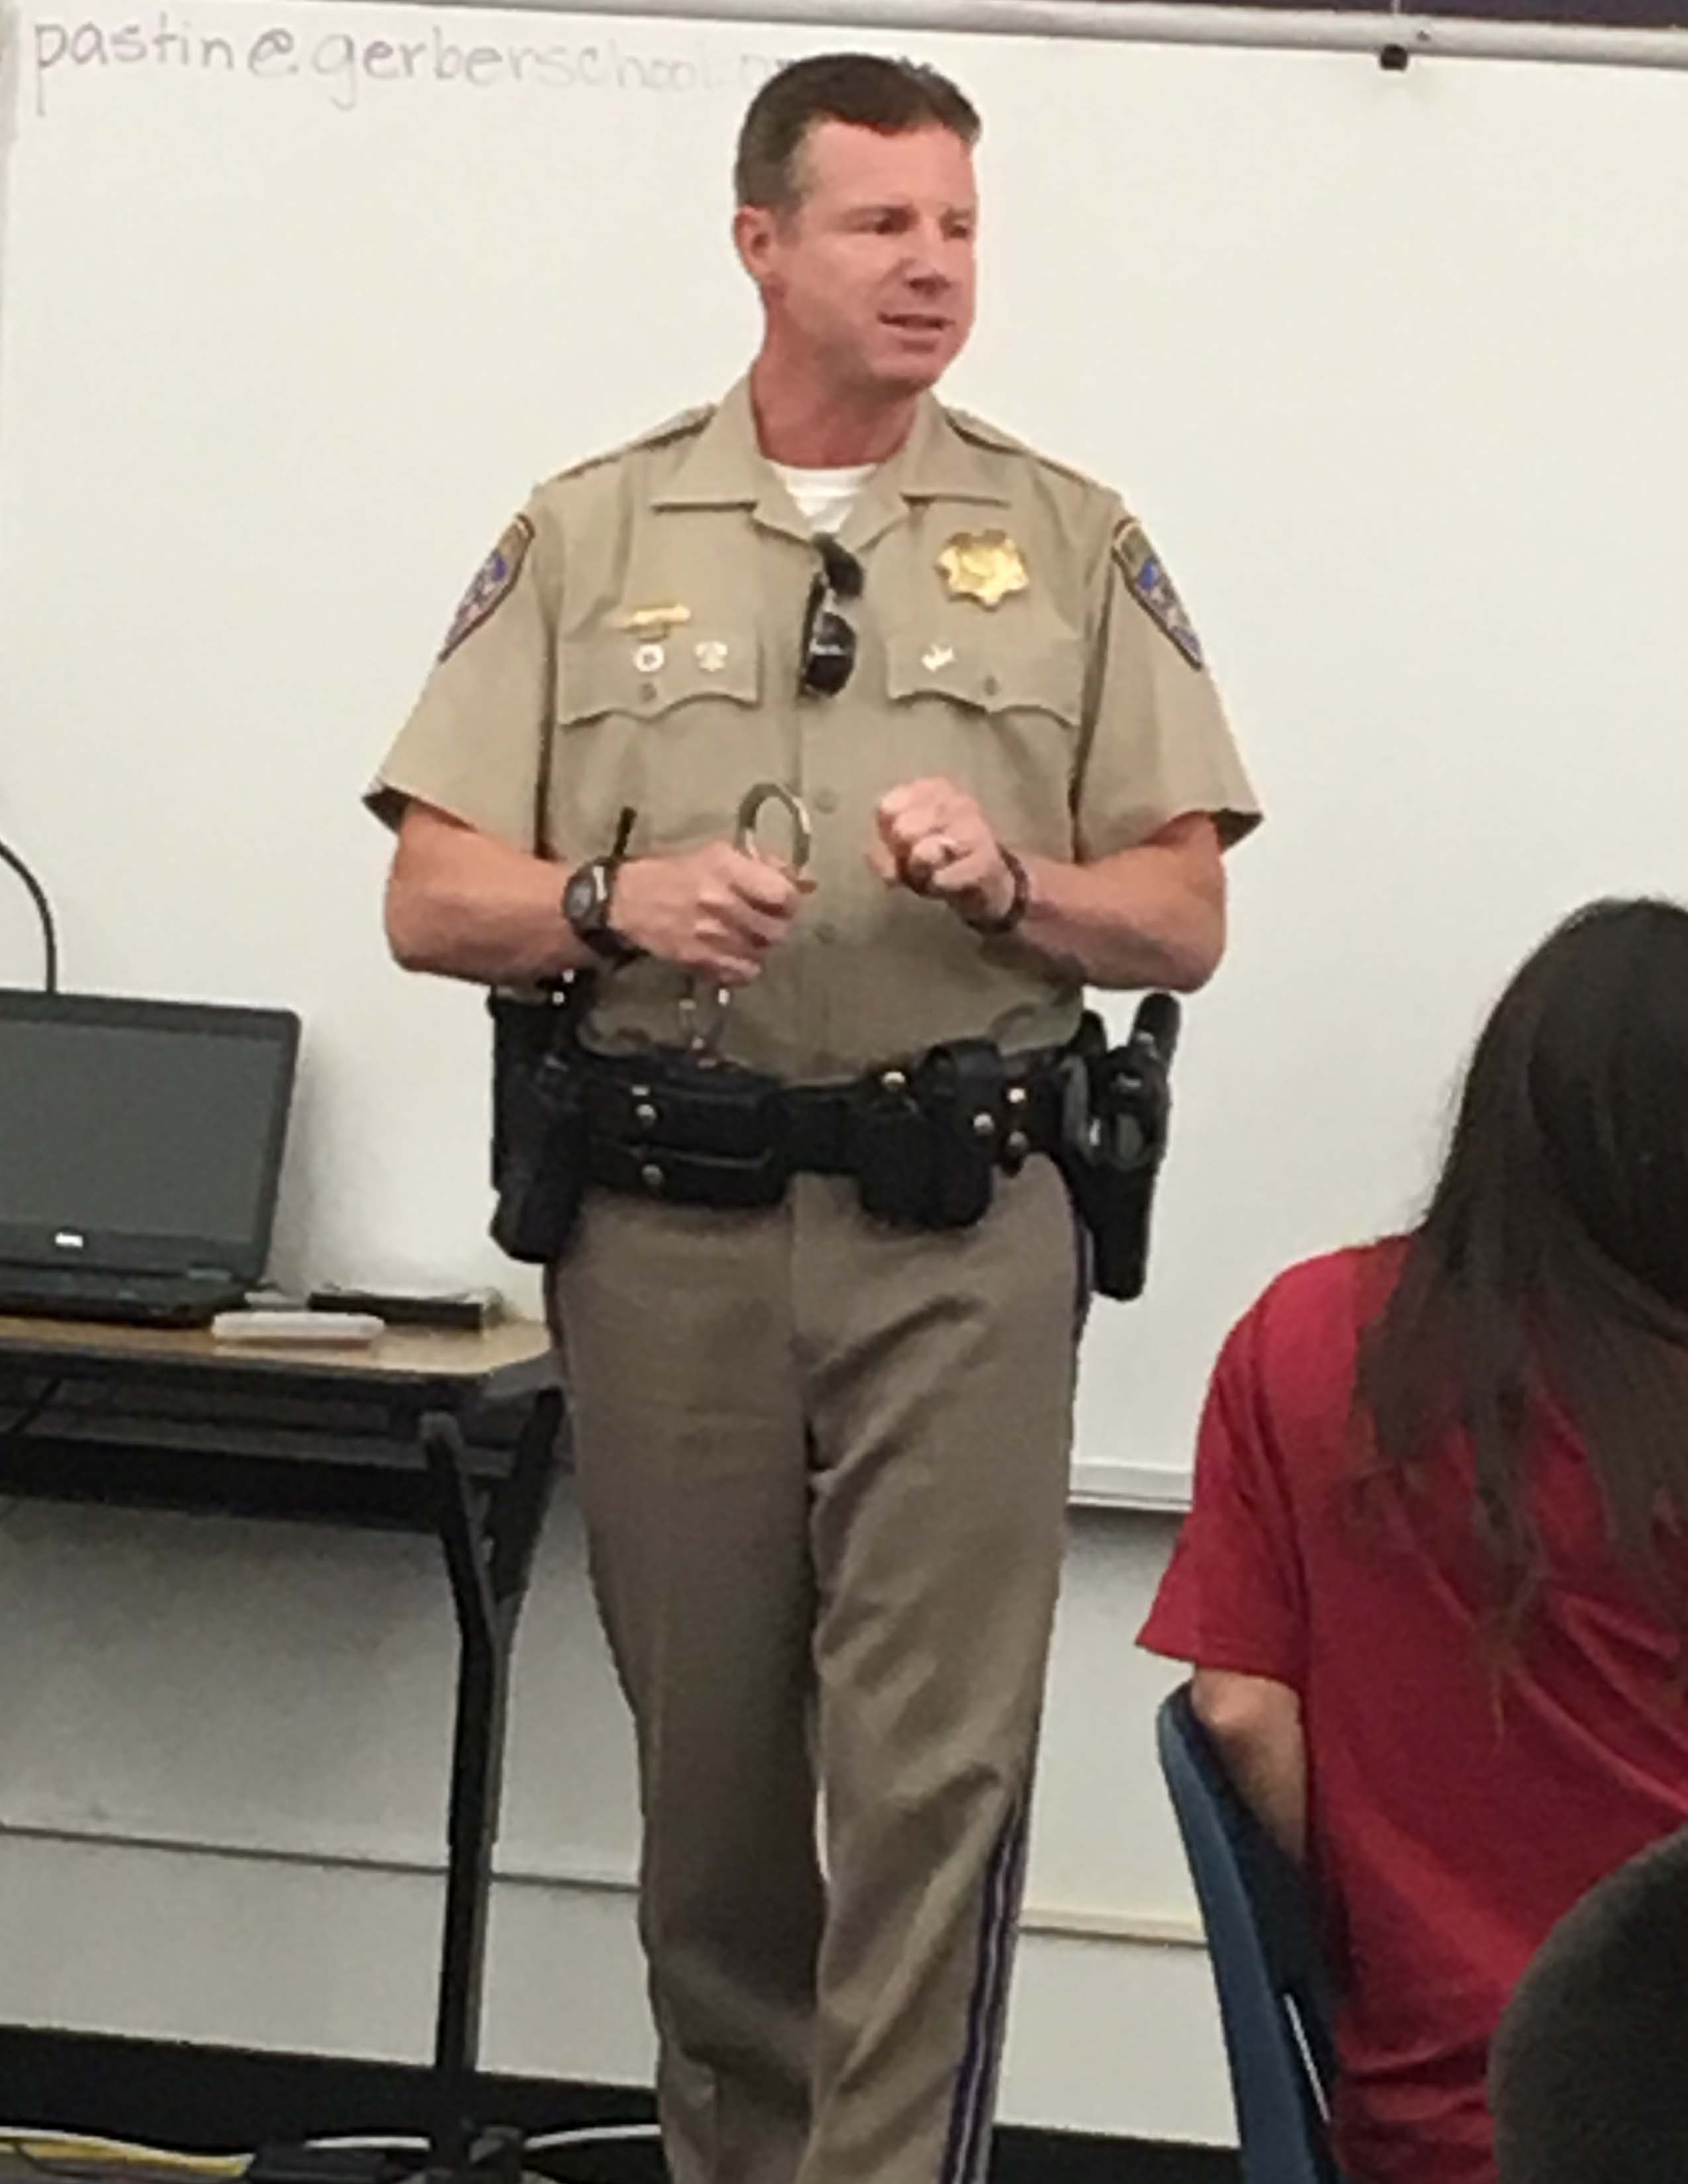 CHP officer at front of classroom